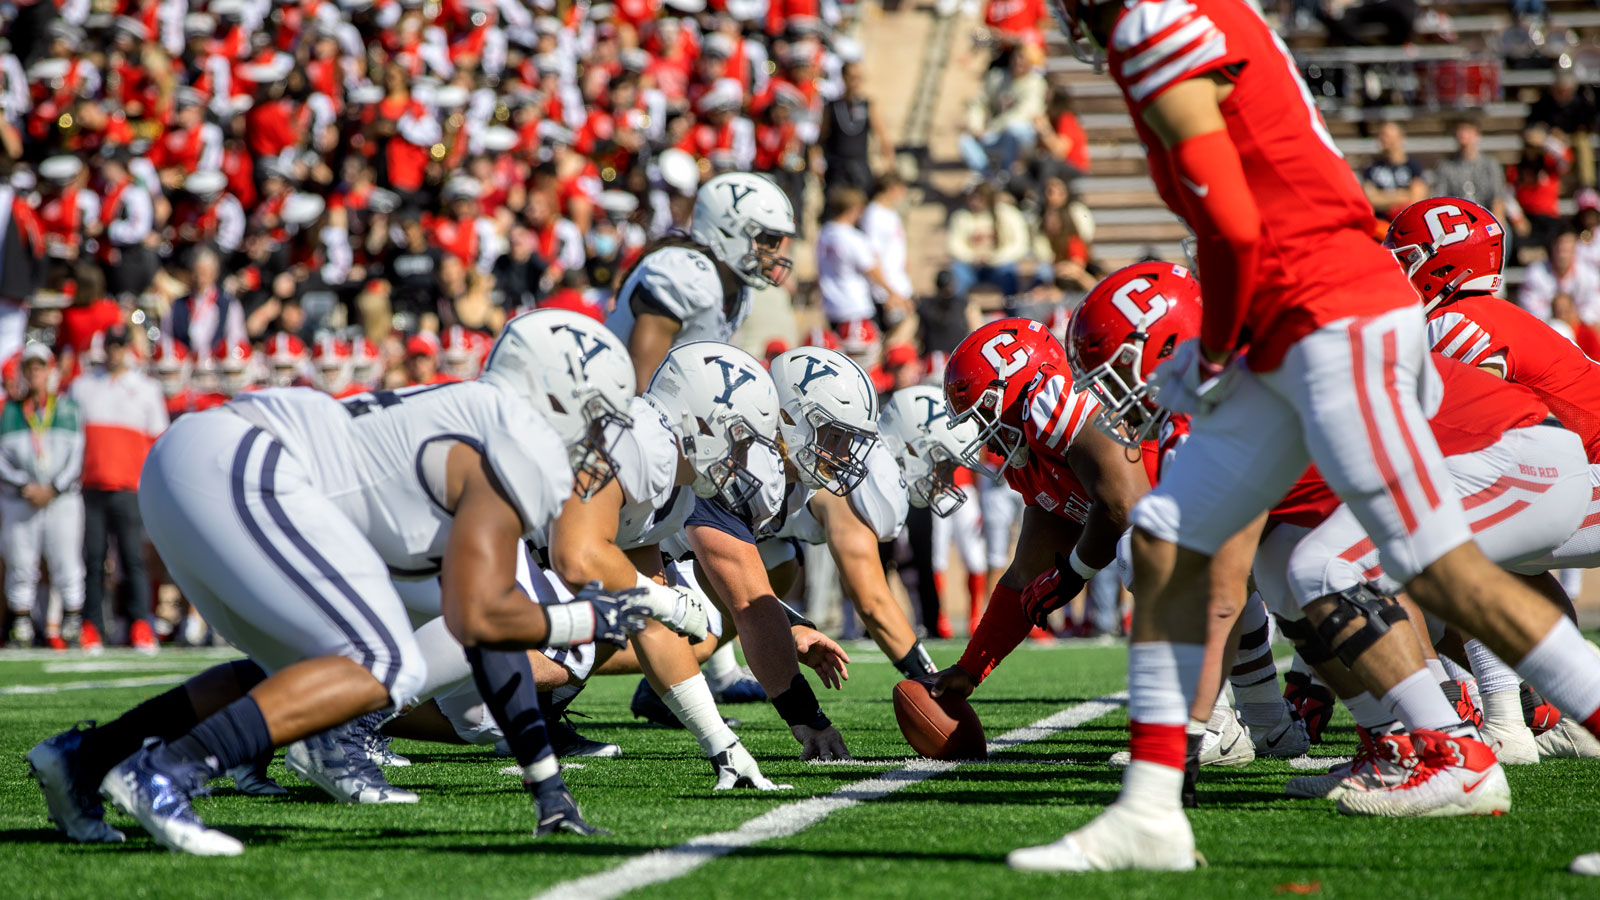 Despite a 99-yard Cornell scoring drive in the first quarter, Big Red football ultimately lost to Yale, 38-14, for the Homecoming game at Schoellkopf